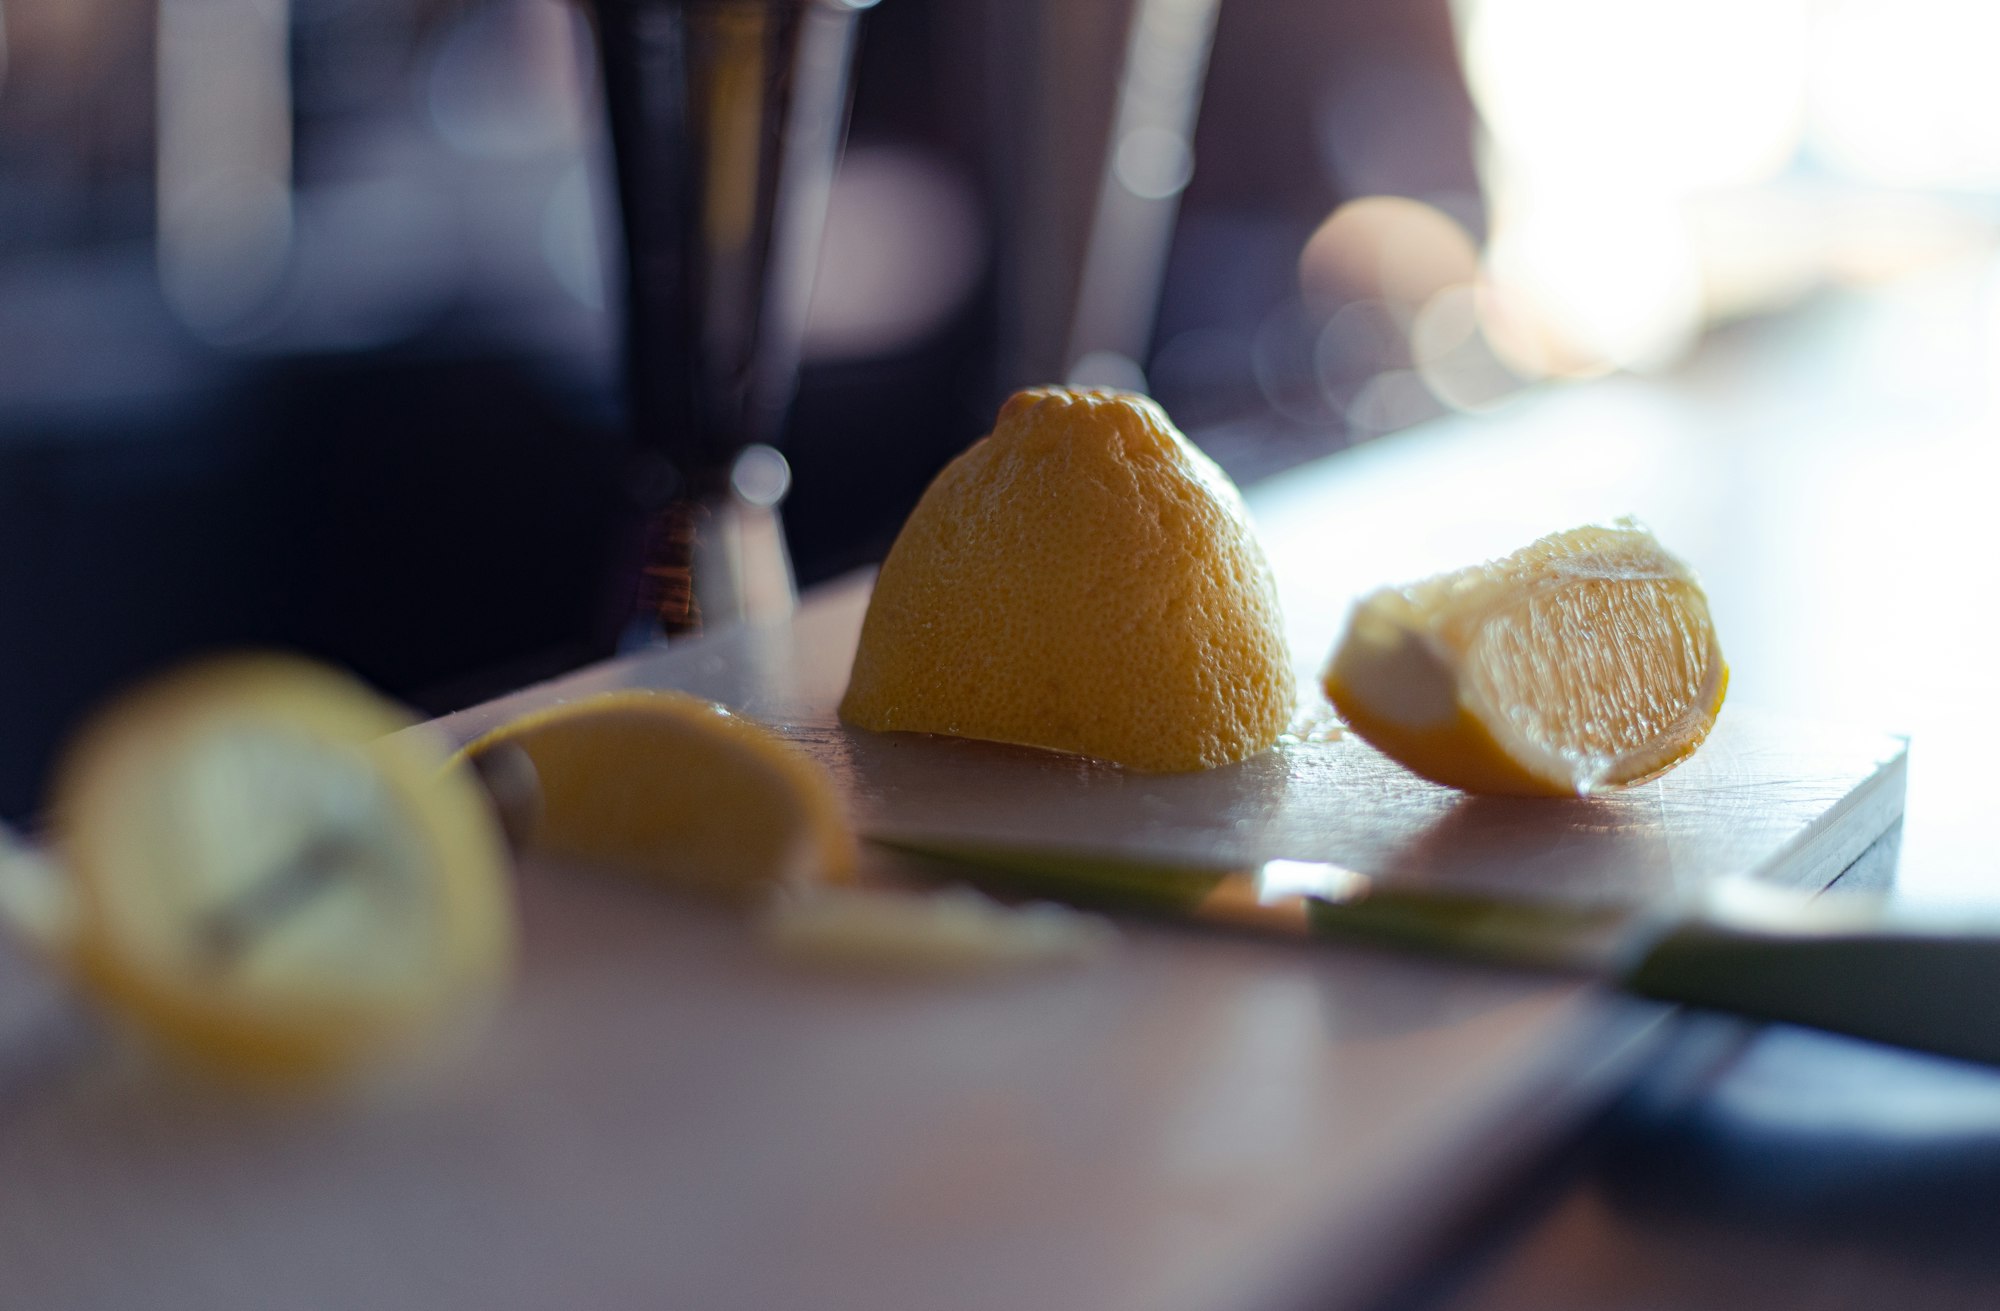 Lemons sliced at a bar counter in preparation for a Christmas cocktail drink.